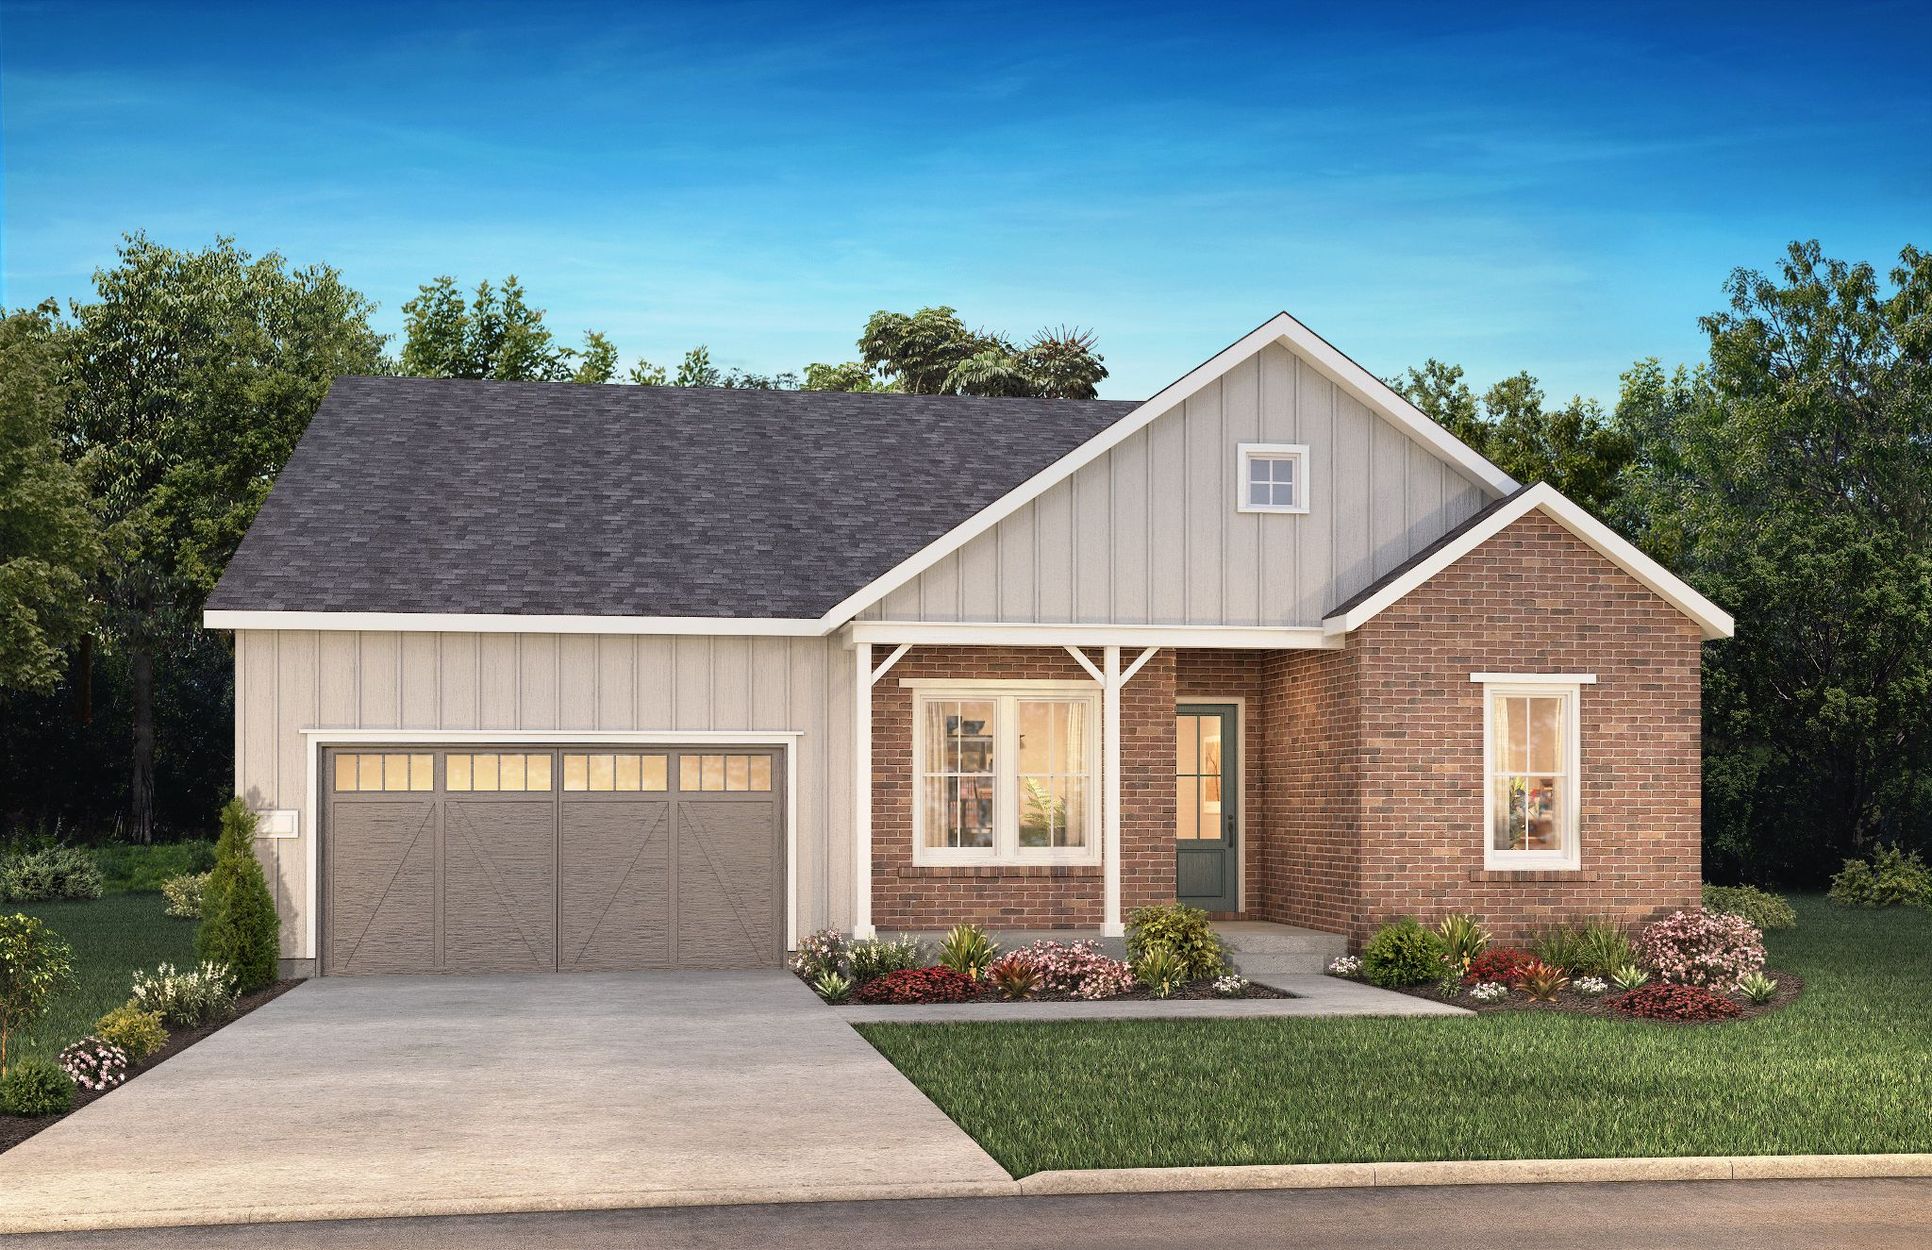 The Canyons Luxe Belcourt Elevation A:Exterior A: Modern Farmhouse